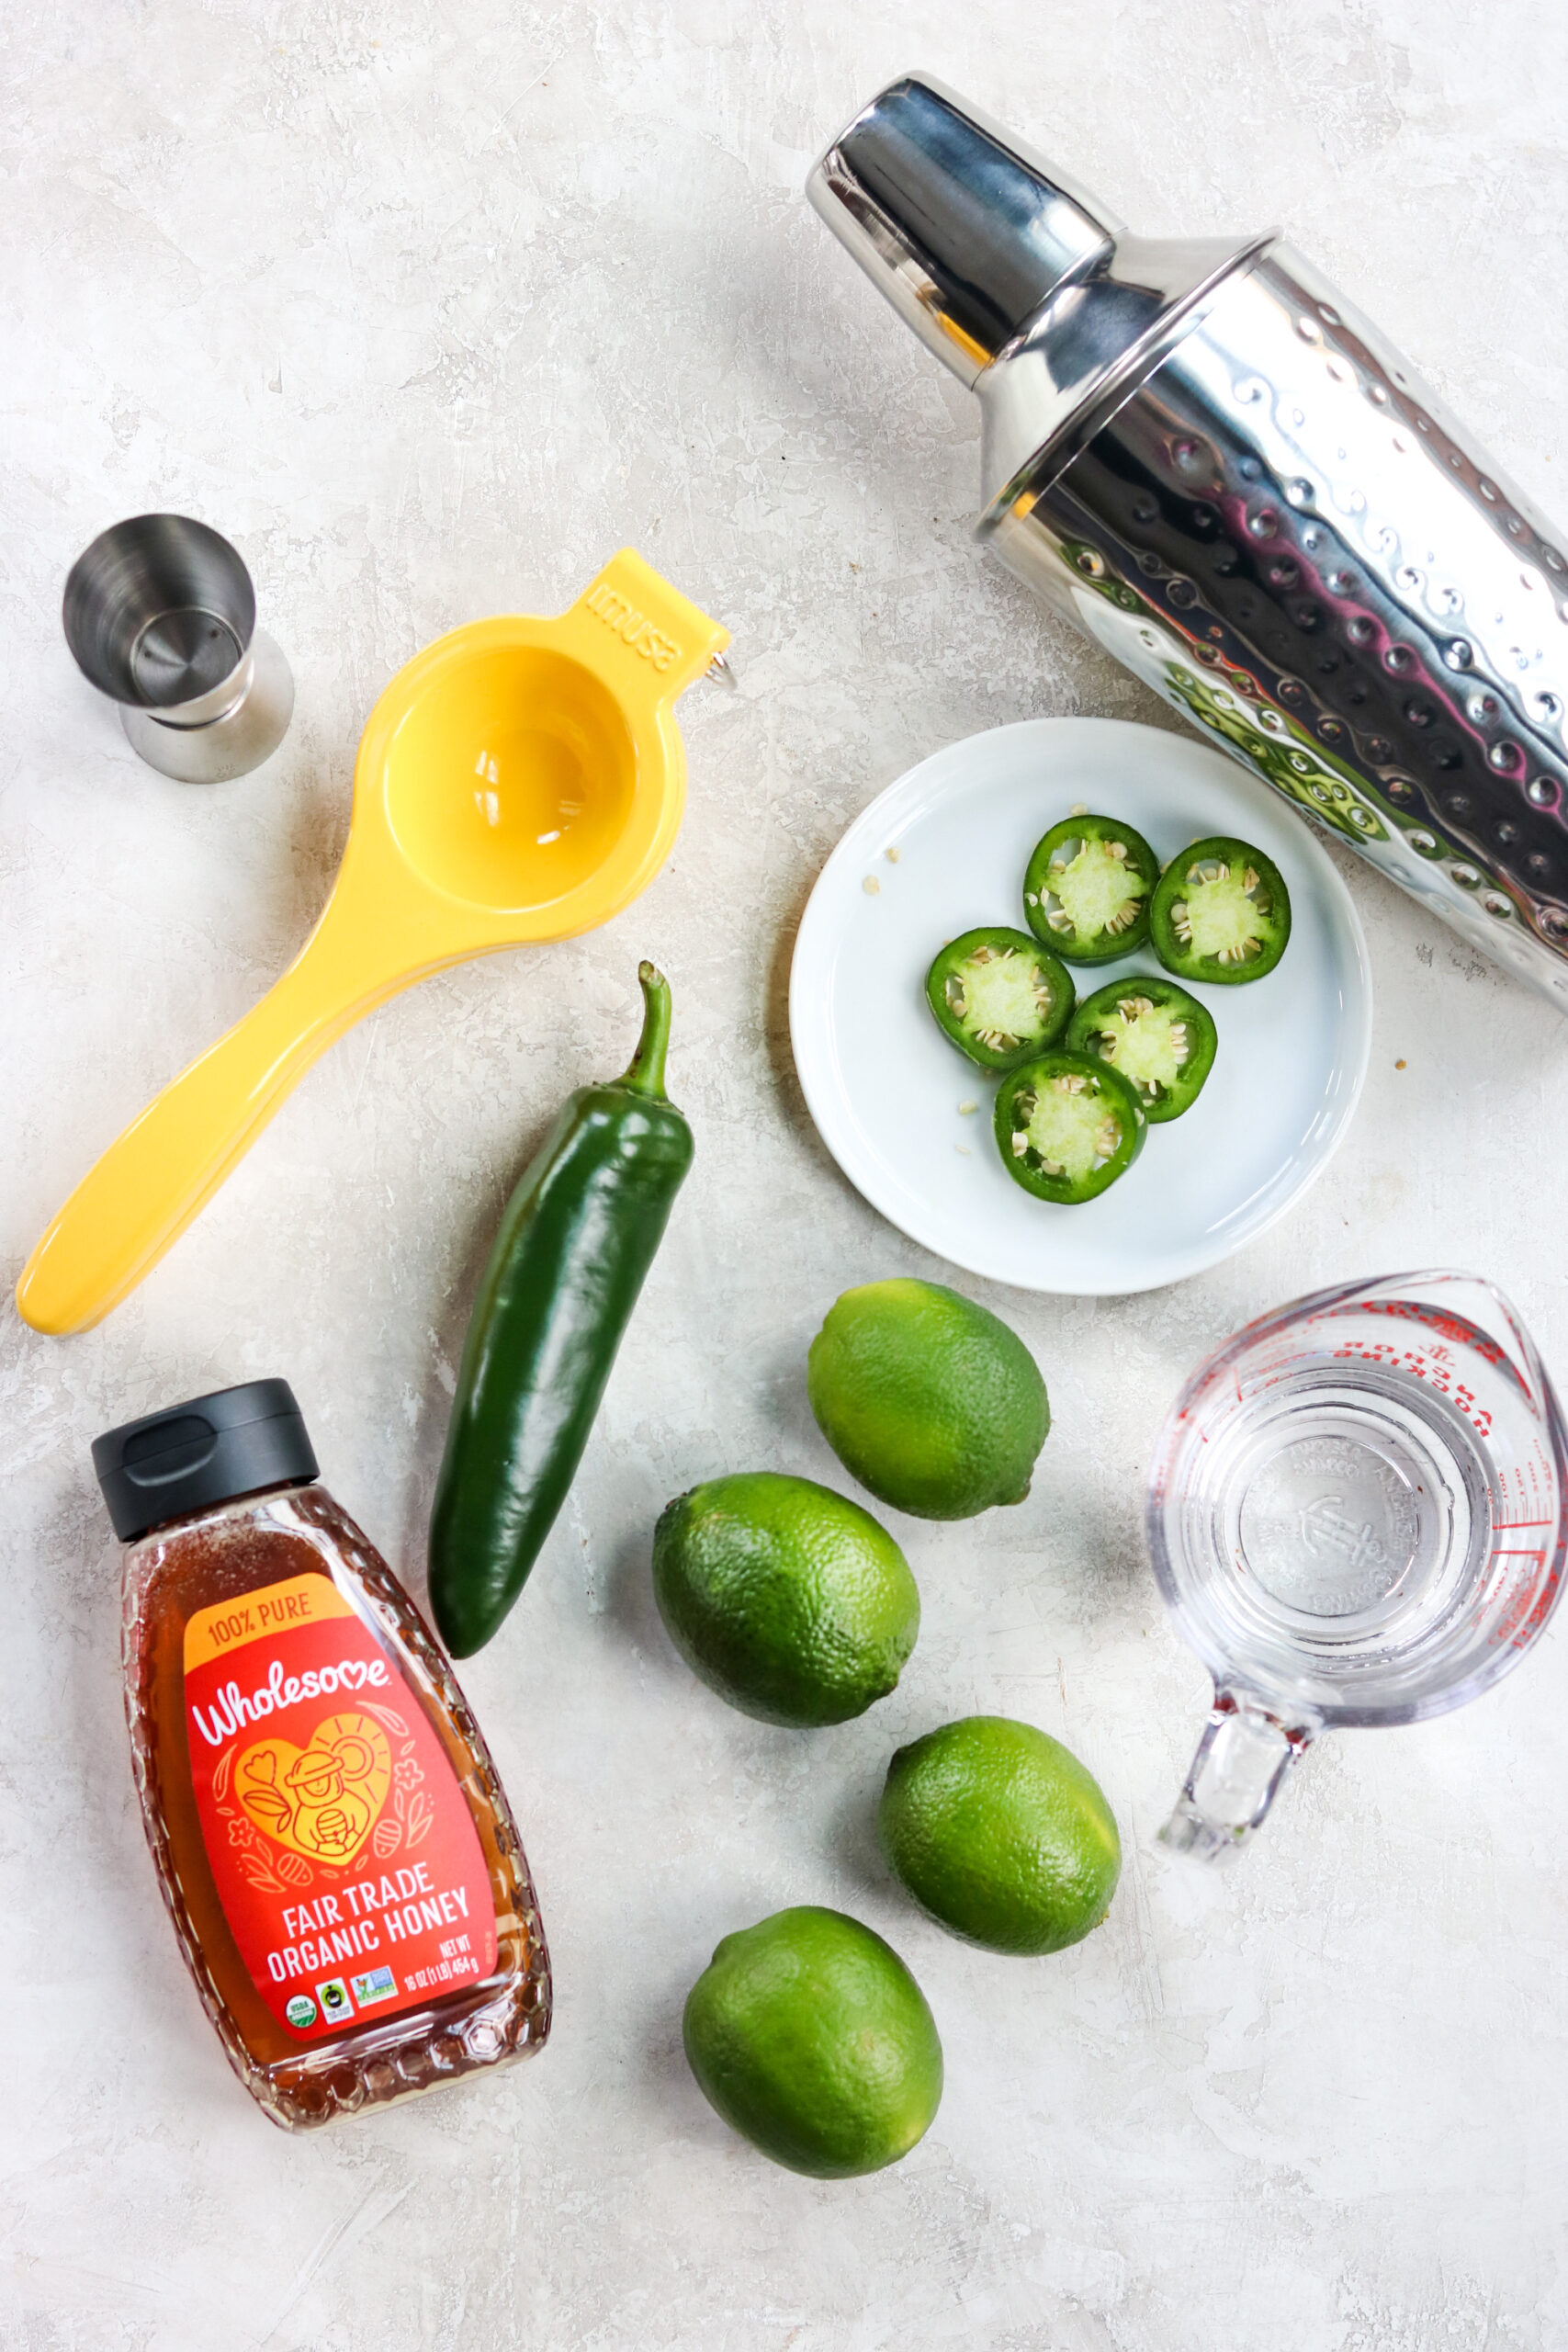 Ingredients for spicy skinny margaritas: honey, limes, jalapeno, and tequila